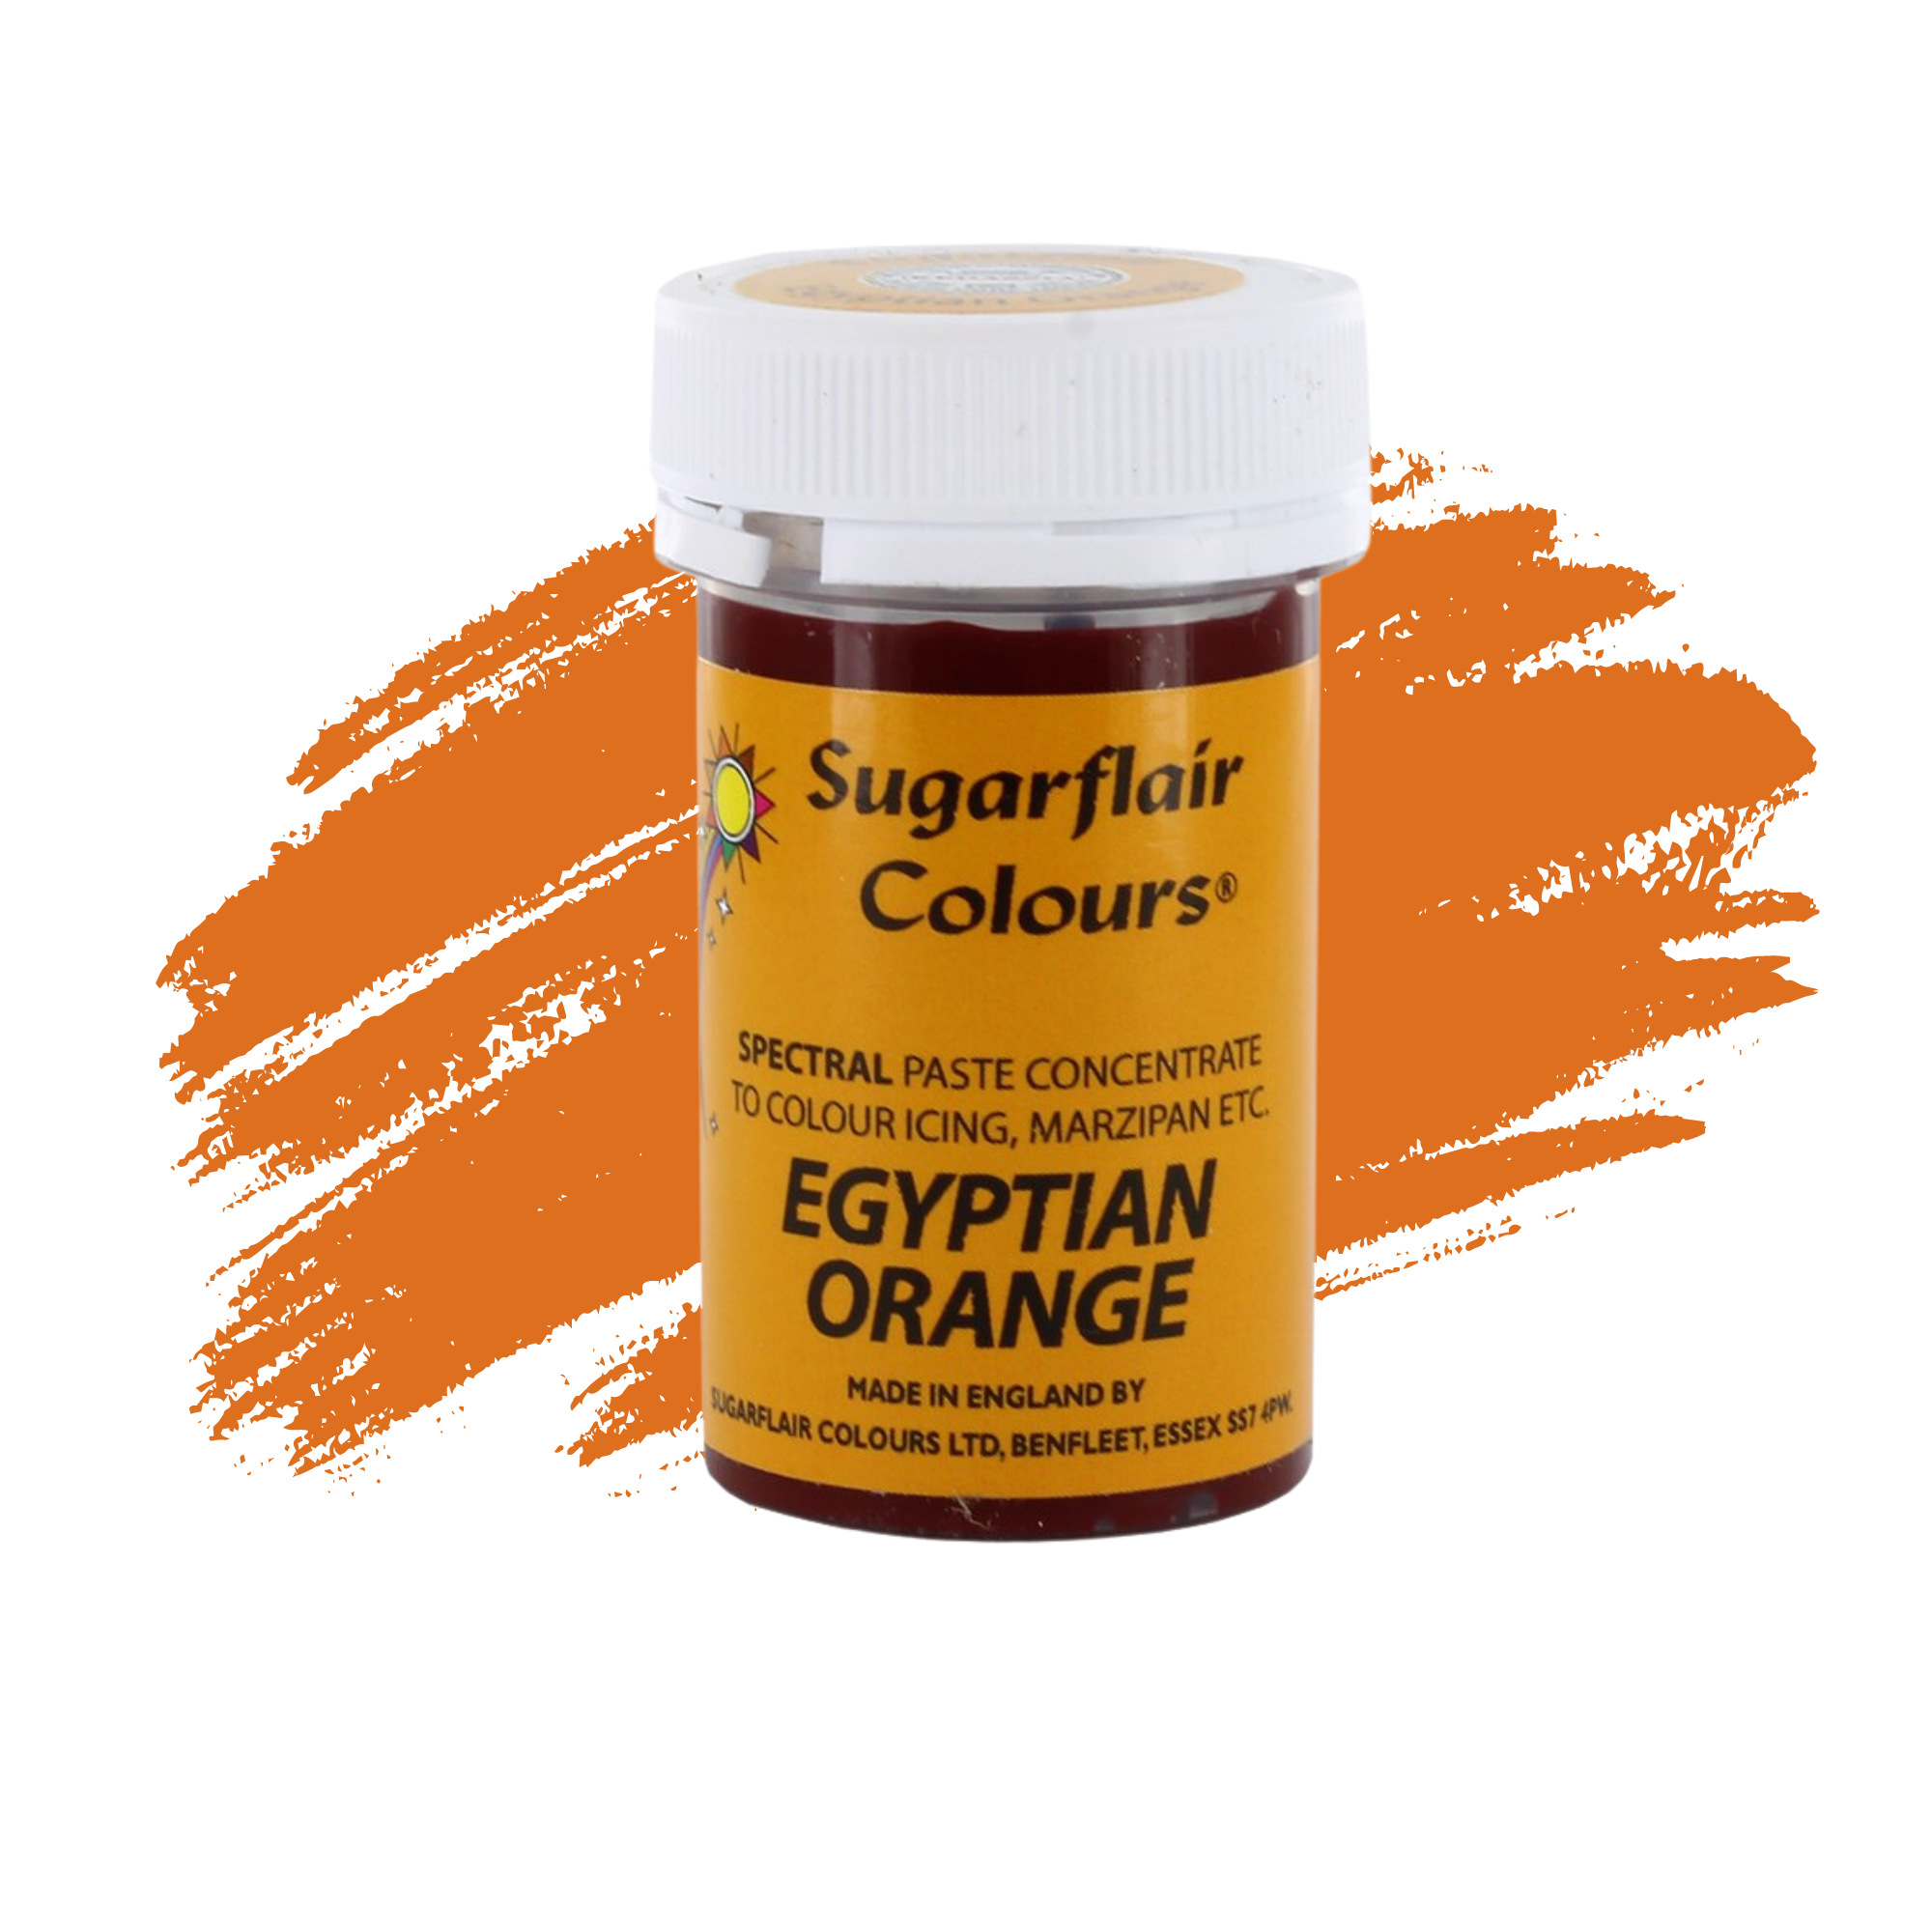 Sugarflair Paste Colours Concentrated Food Colouring - Spectral Egyptian Orange - 25g